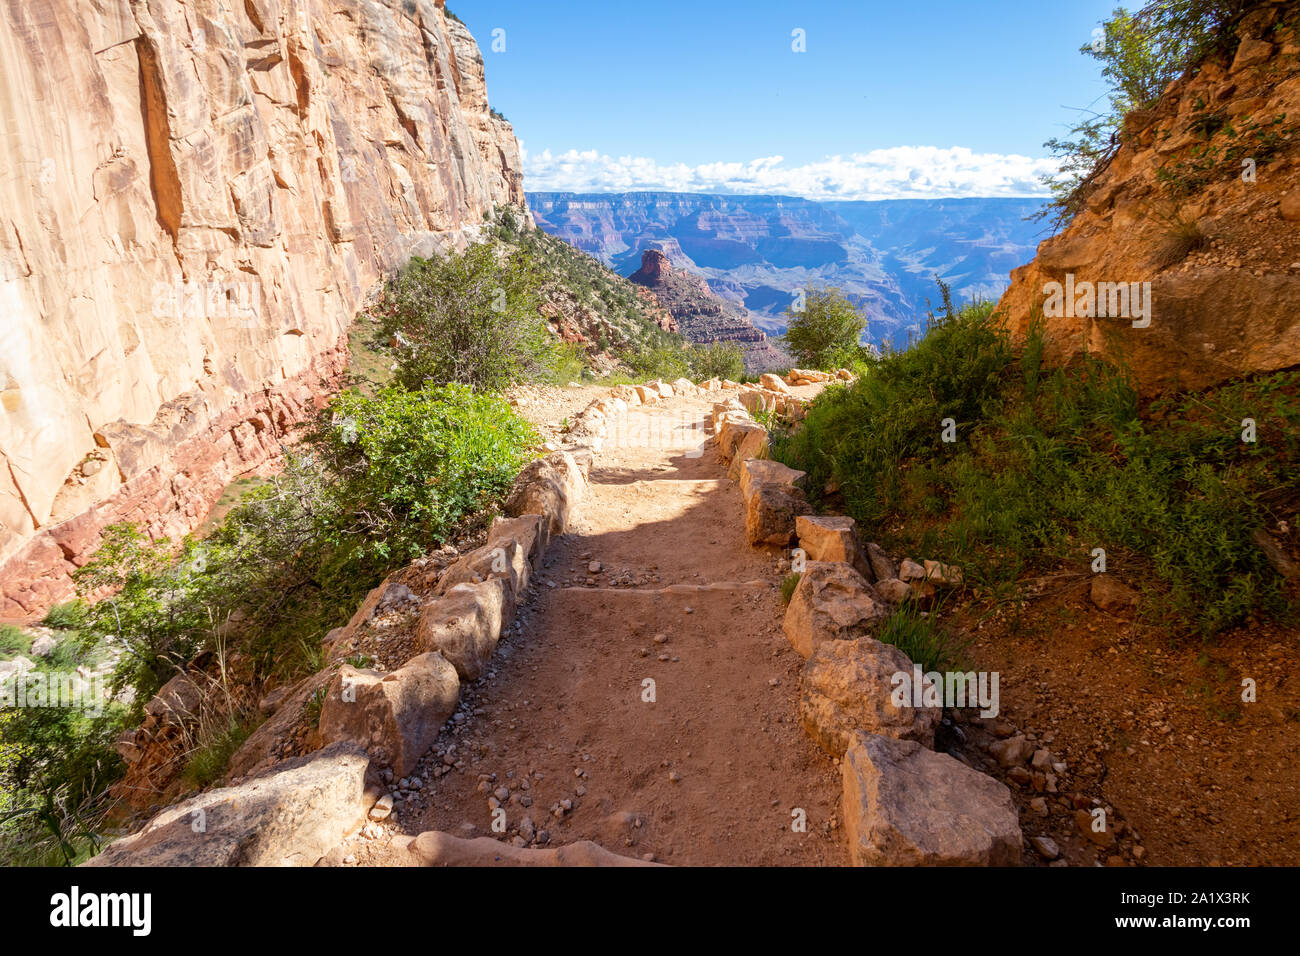 The Grand Canyon is a steep-sided canyon carved by the Colorado River in Arizona, United States. Travel destination, beautiful scenery, landscape. Hug Stock Photo